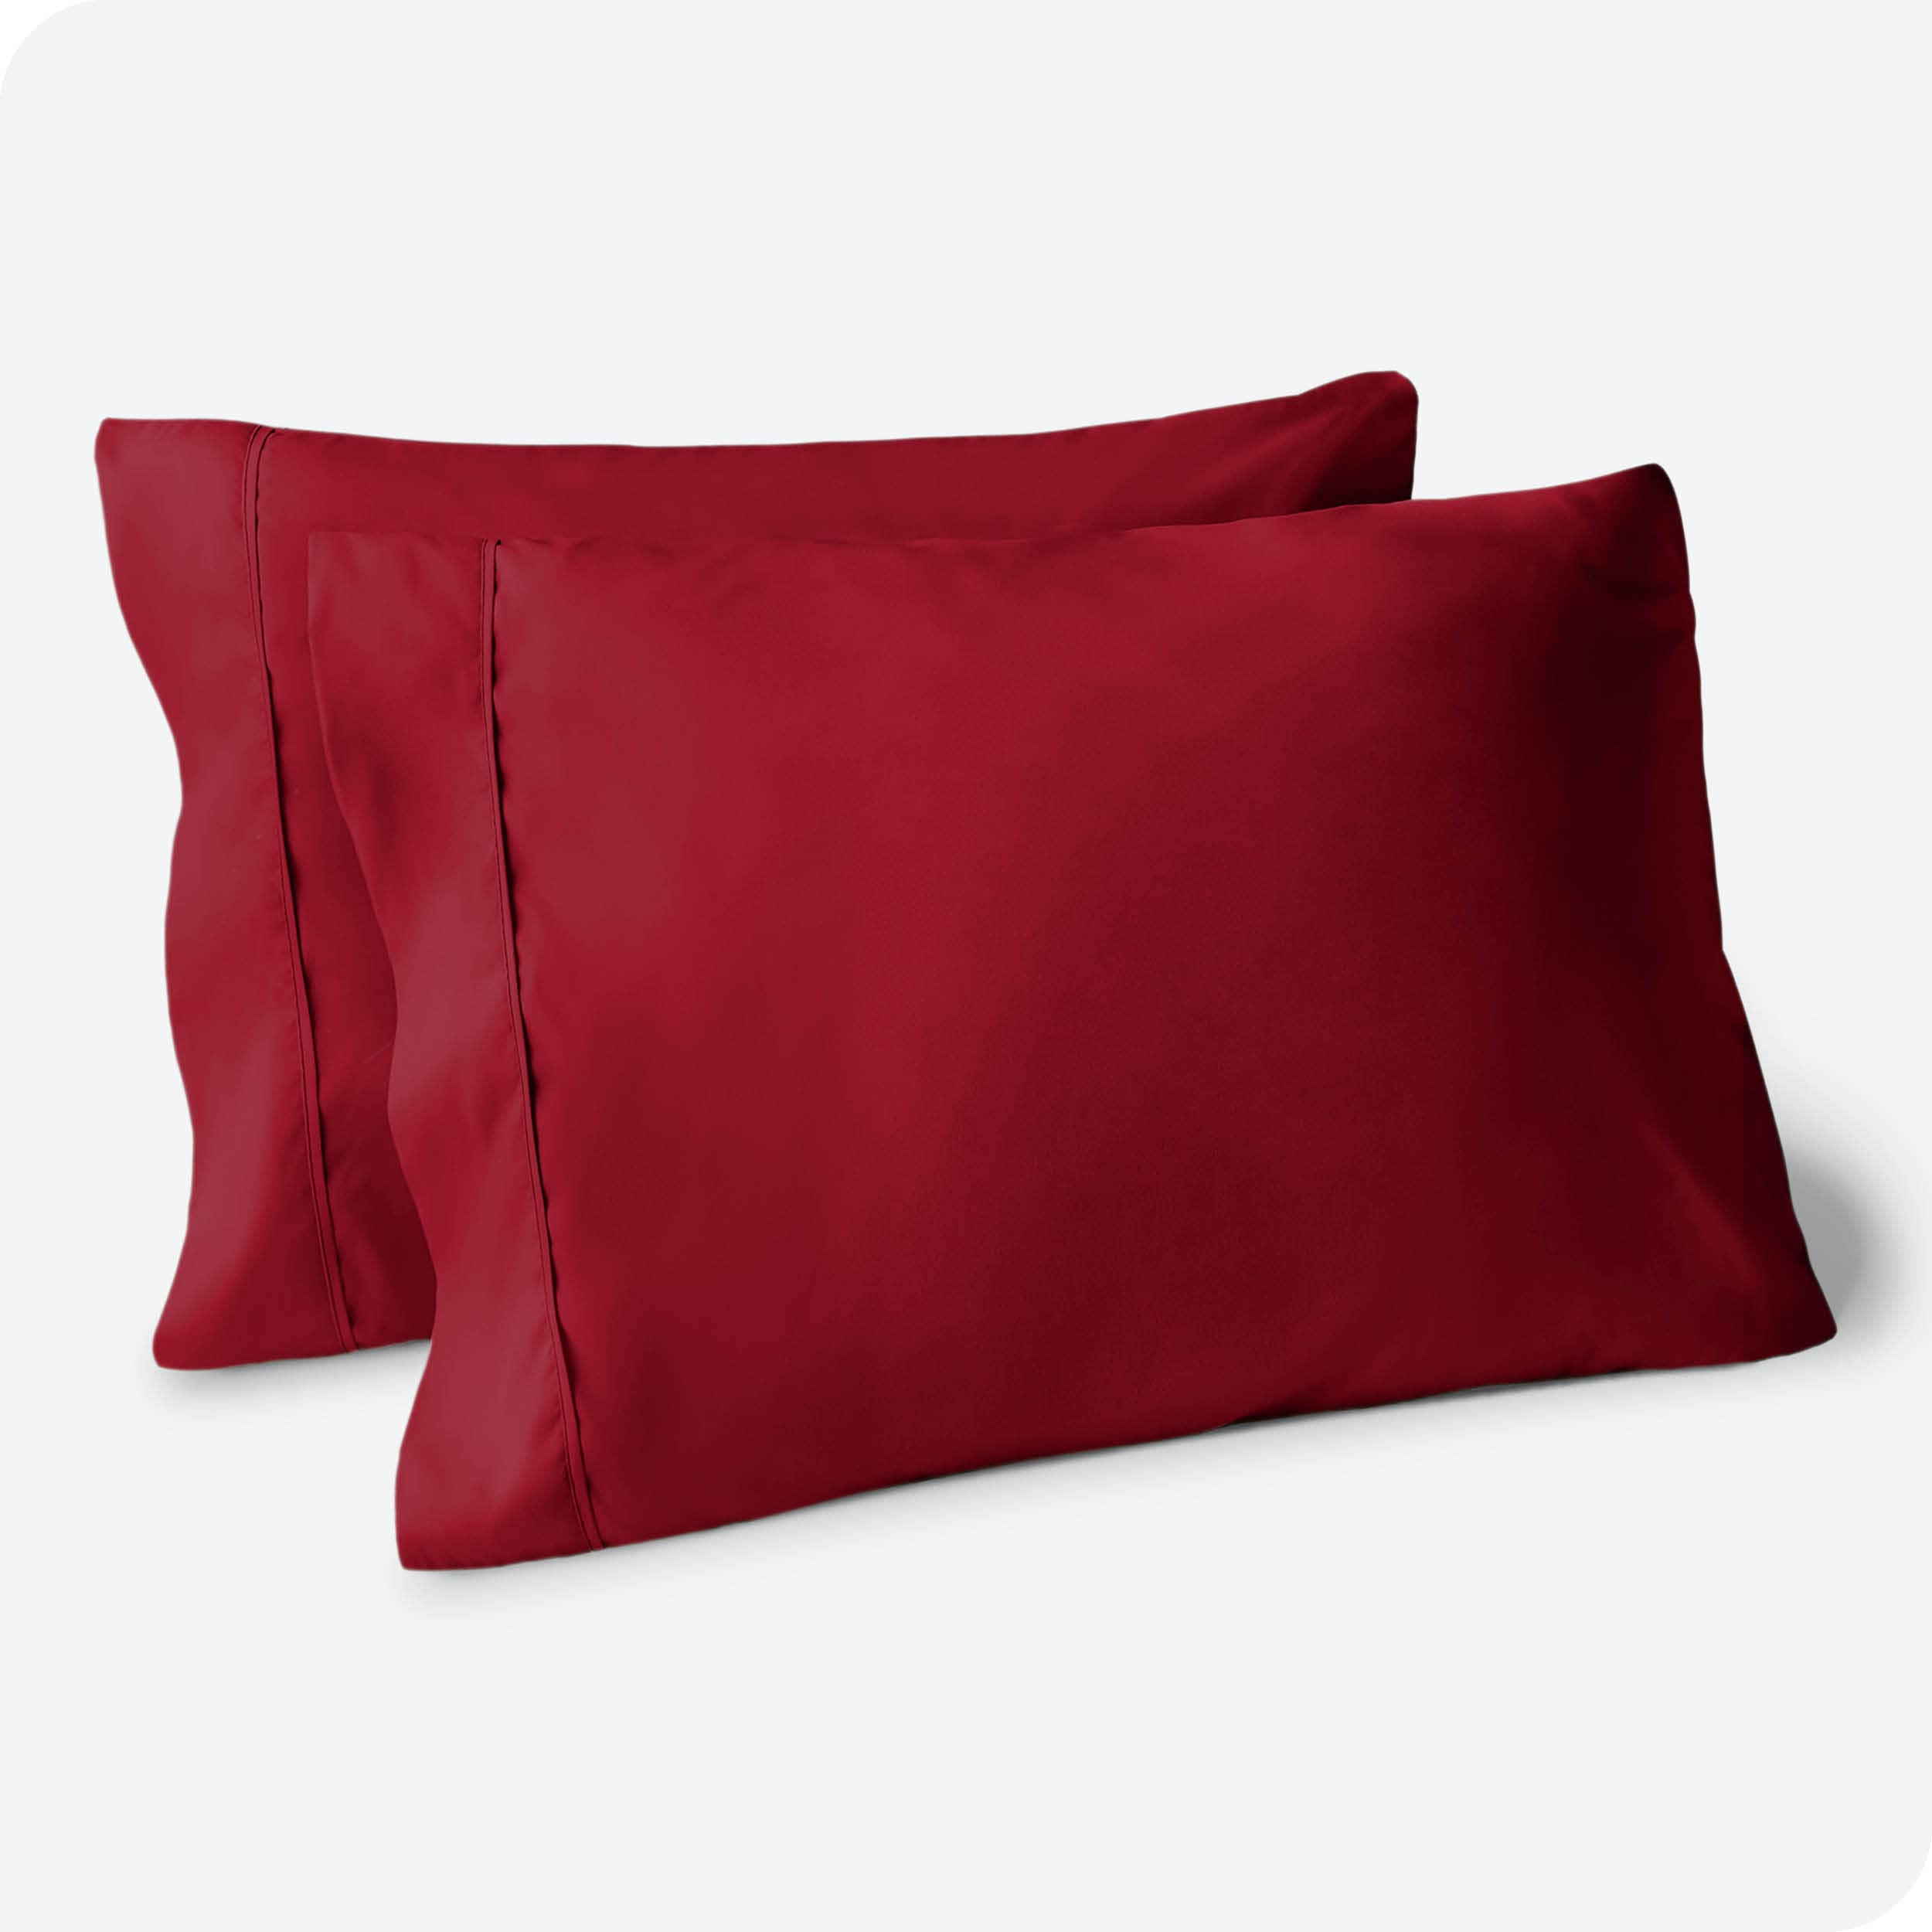 Book Cover Bare Home Microfiber Pillow Cases - Standard/Queen Size Set of 2 - Cooling Pillowcases - Double Brushed - Red Pillowcases 2 Pack - Easy Care (Standard Pillowcase Set of 2, Red) 20x30 Standard/Queen (2 Pack) 22 - Red